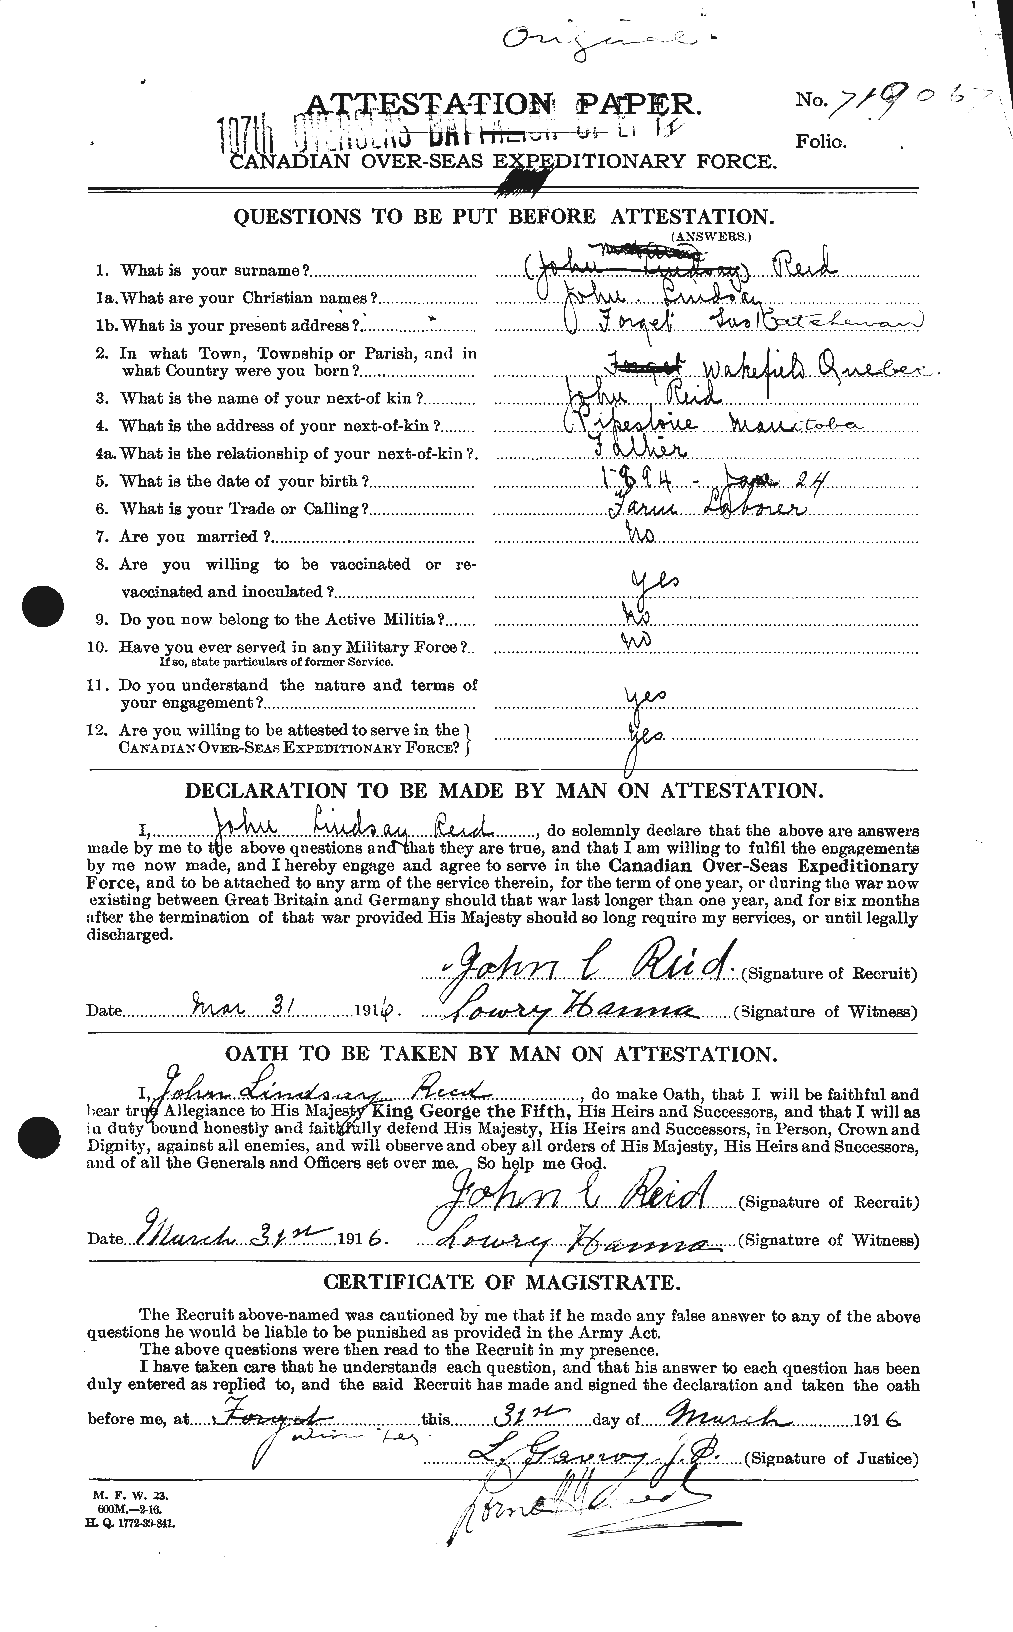 Personnel Records of the First World War - CEF 598853a